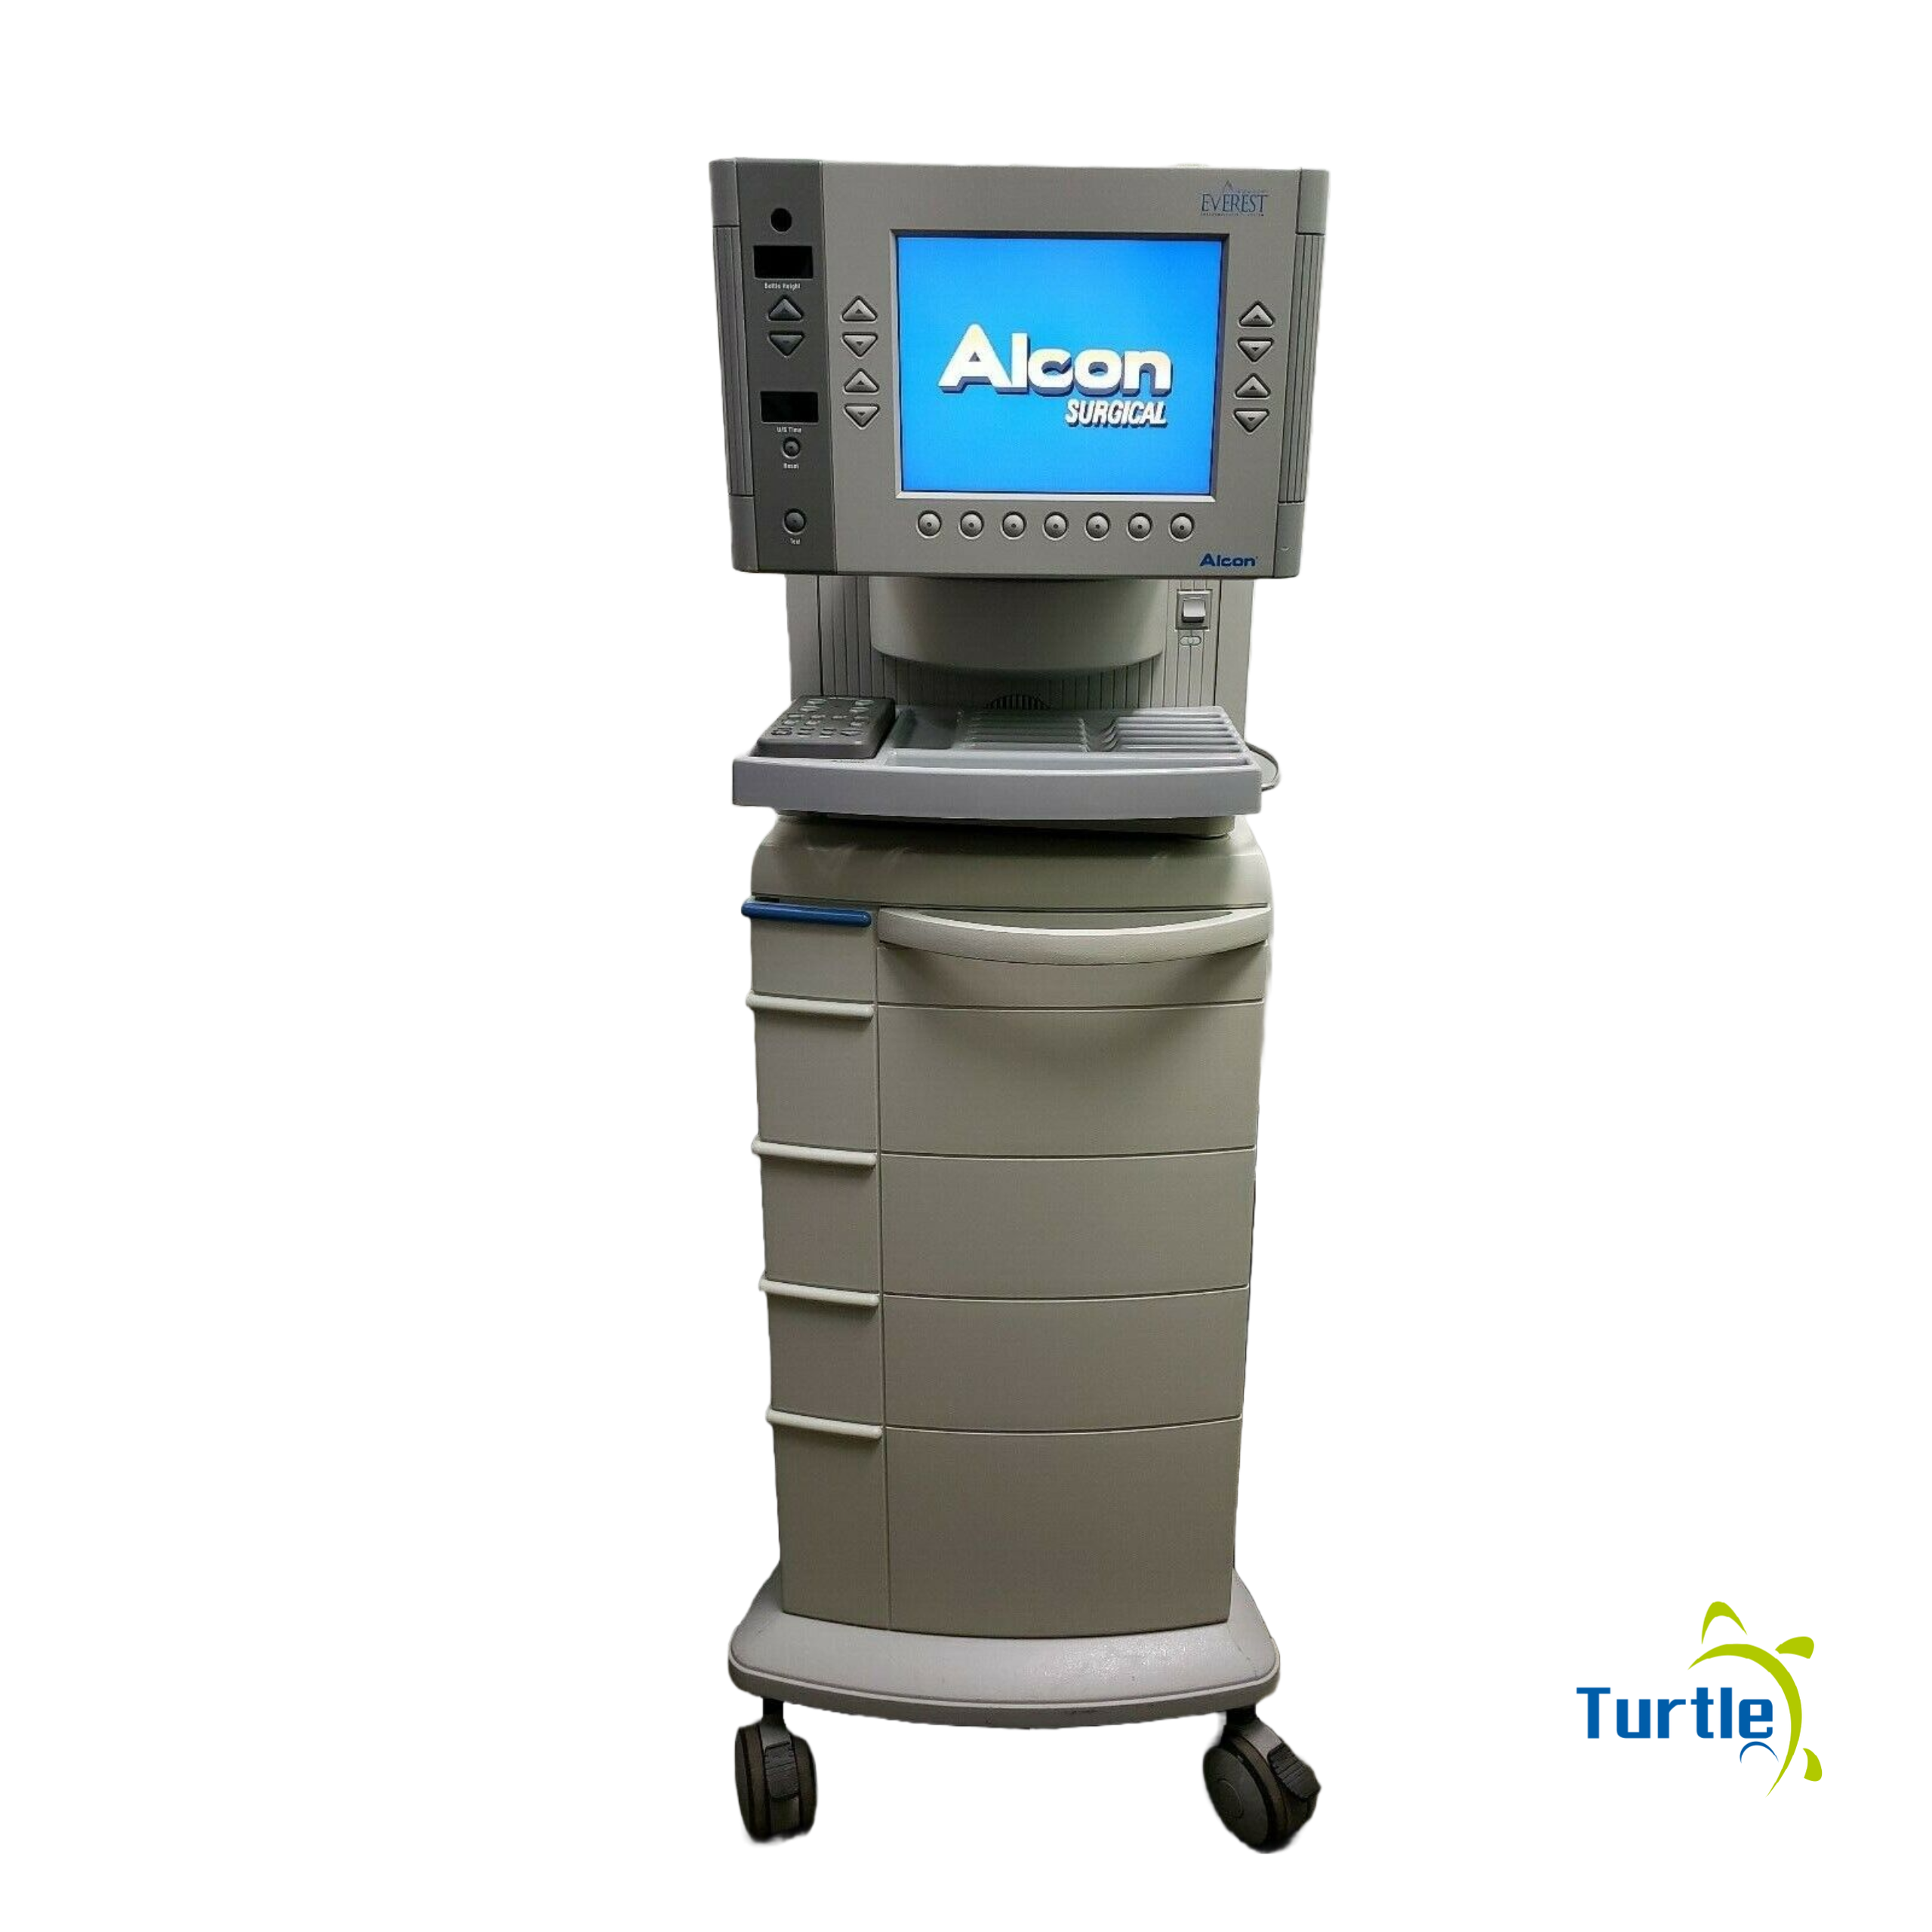 Alcon Series 20000 Legacy Everest Phacoemulsifier Vision System with Hand piece